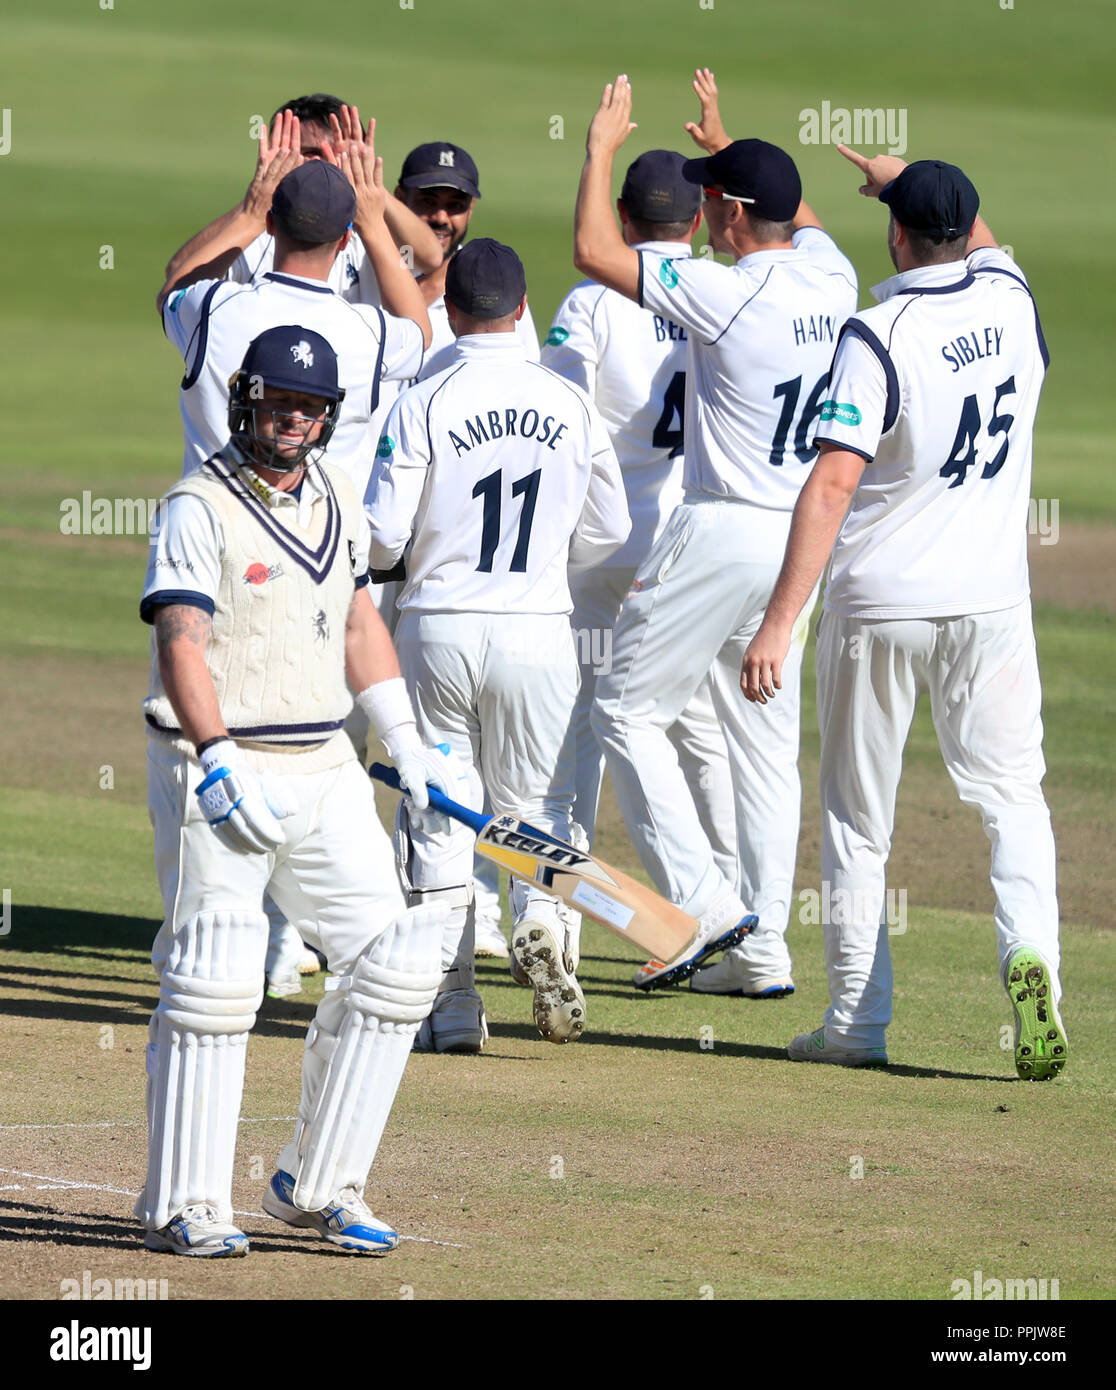 Kent's Darren Stevens looks back after being dismissed by Warwickshire's Chris Wright during day three of the Specsavers County Championship Division Two match at Edgbaston, Birmingham. Stock Photo